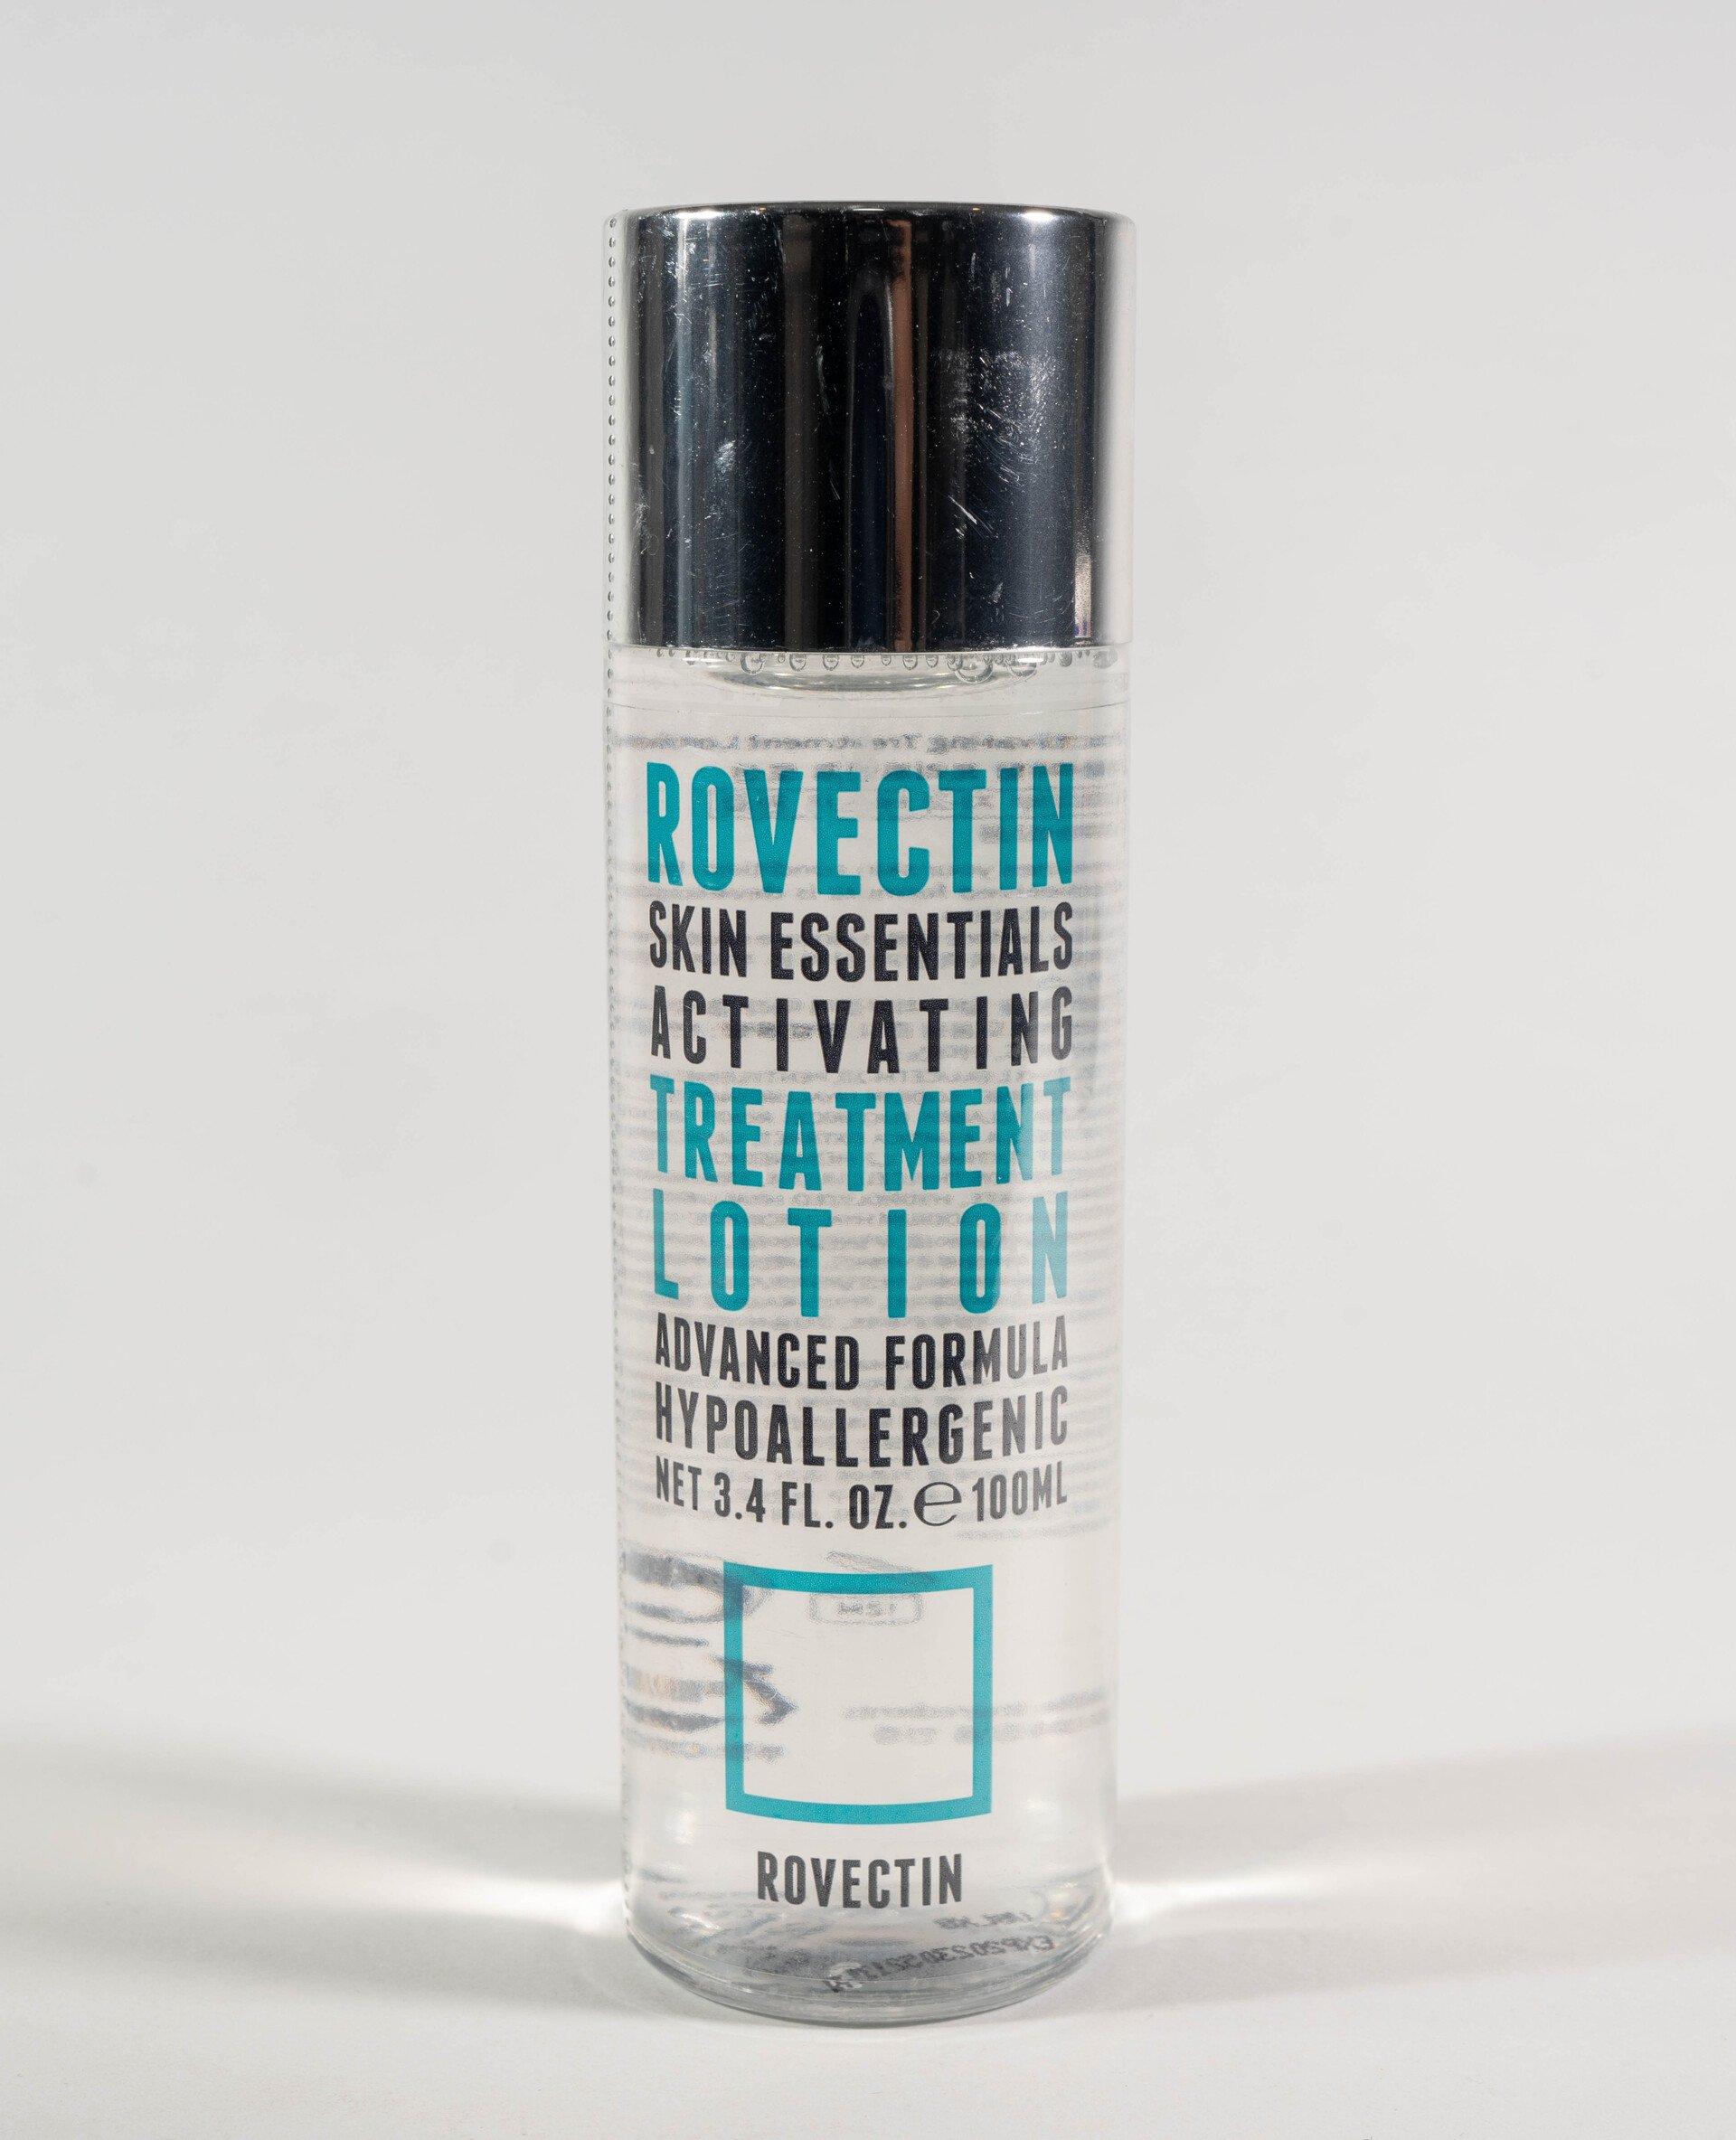 ROVECTIN Skin Essentials Activating Treatment Lotion